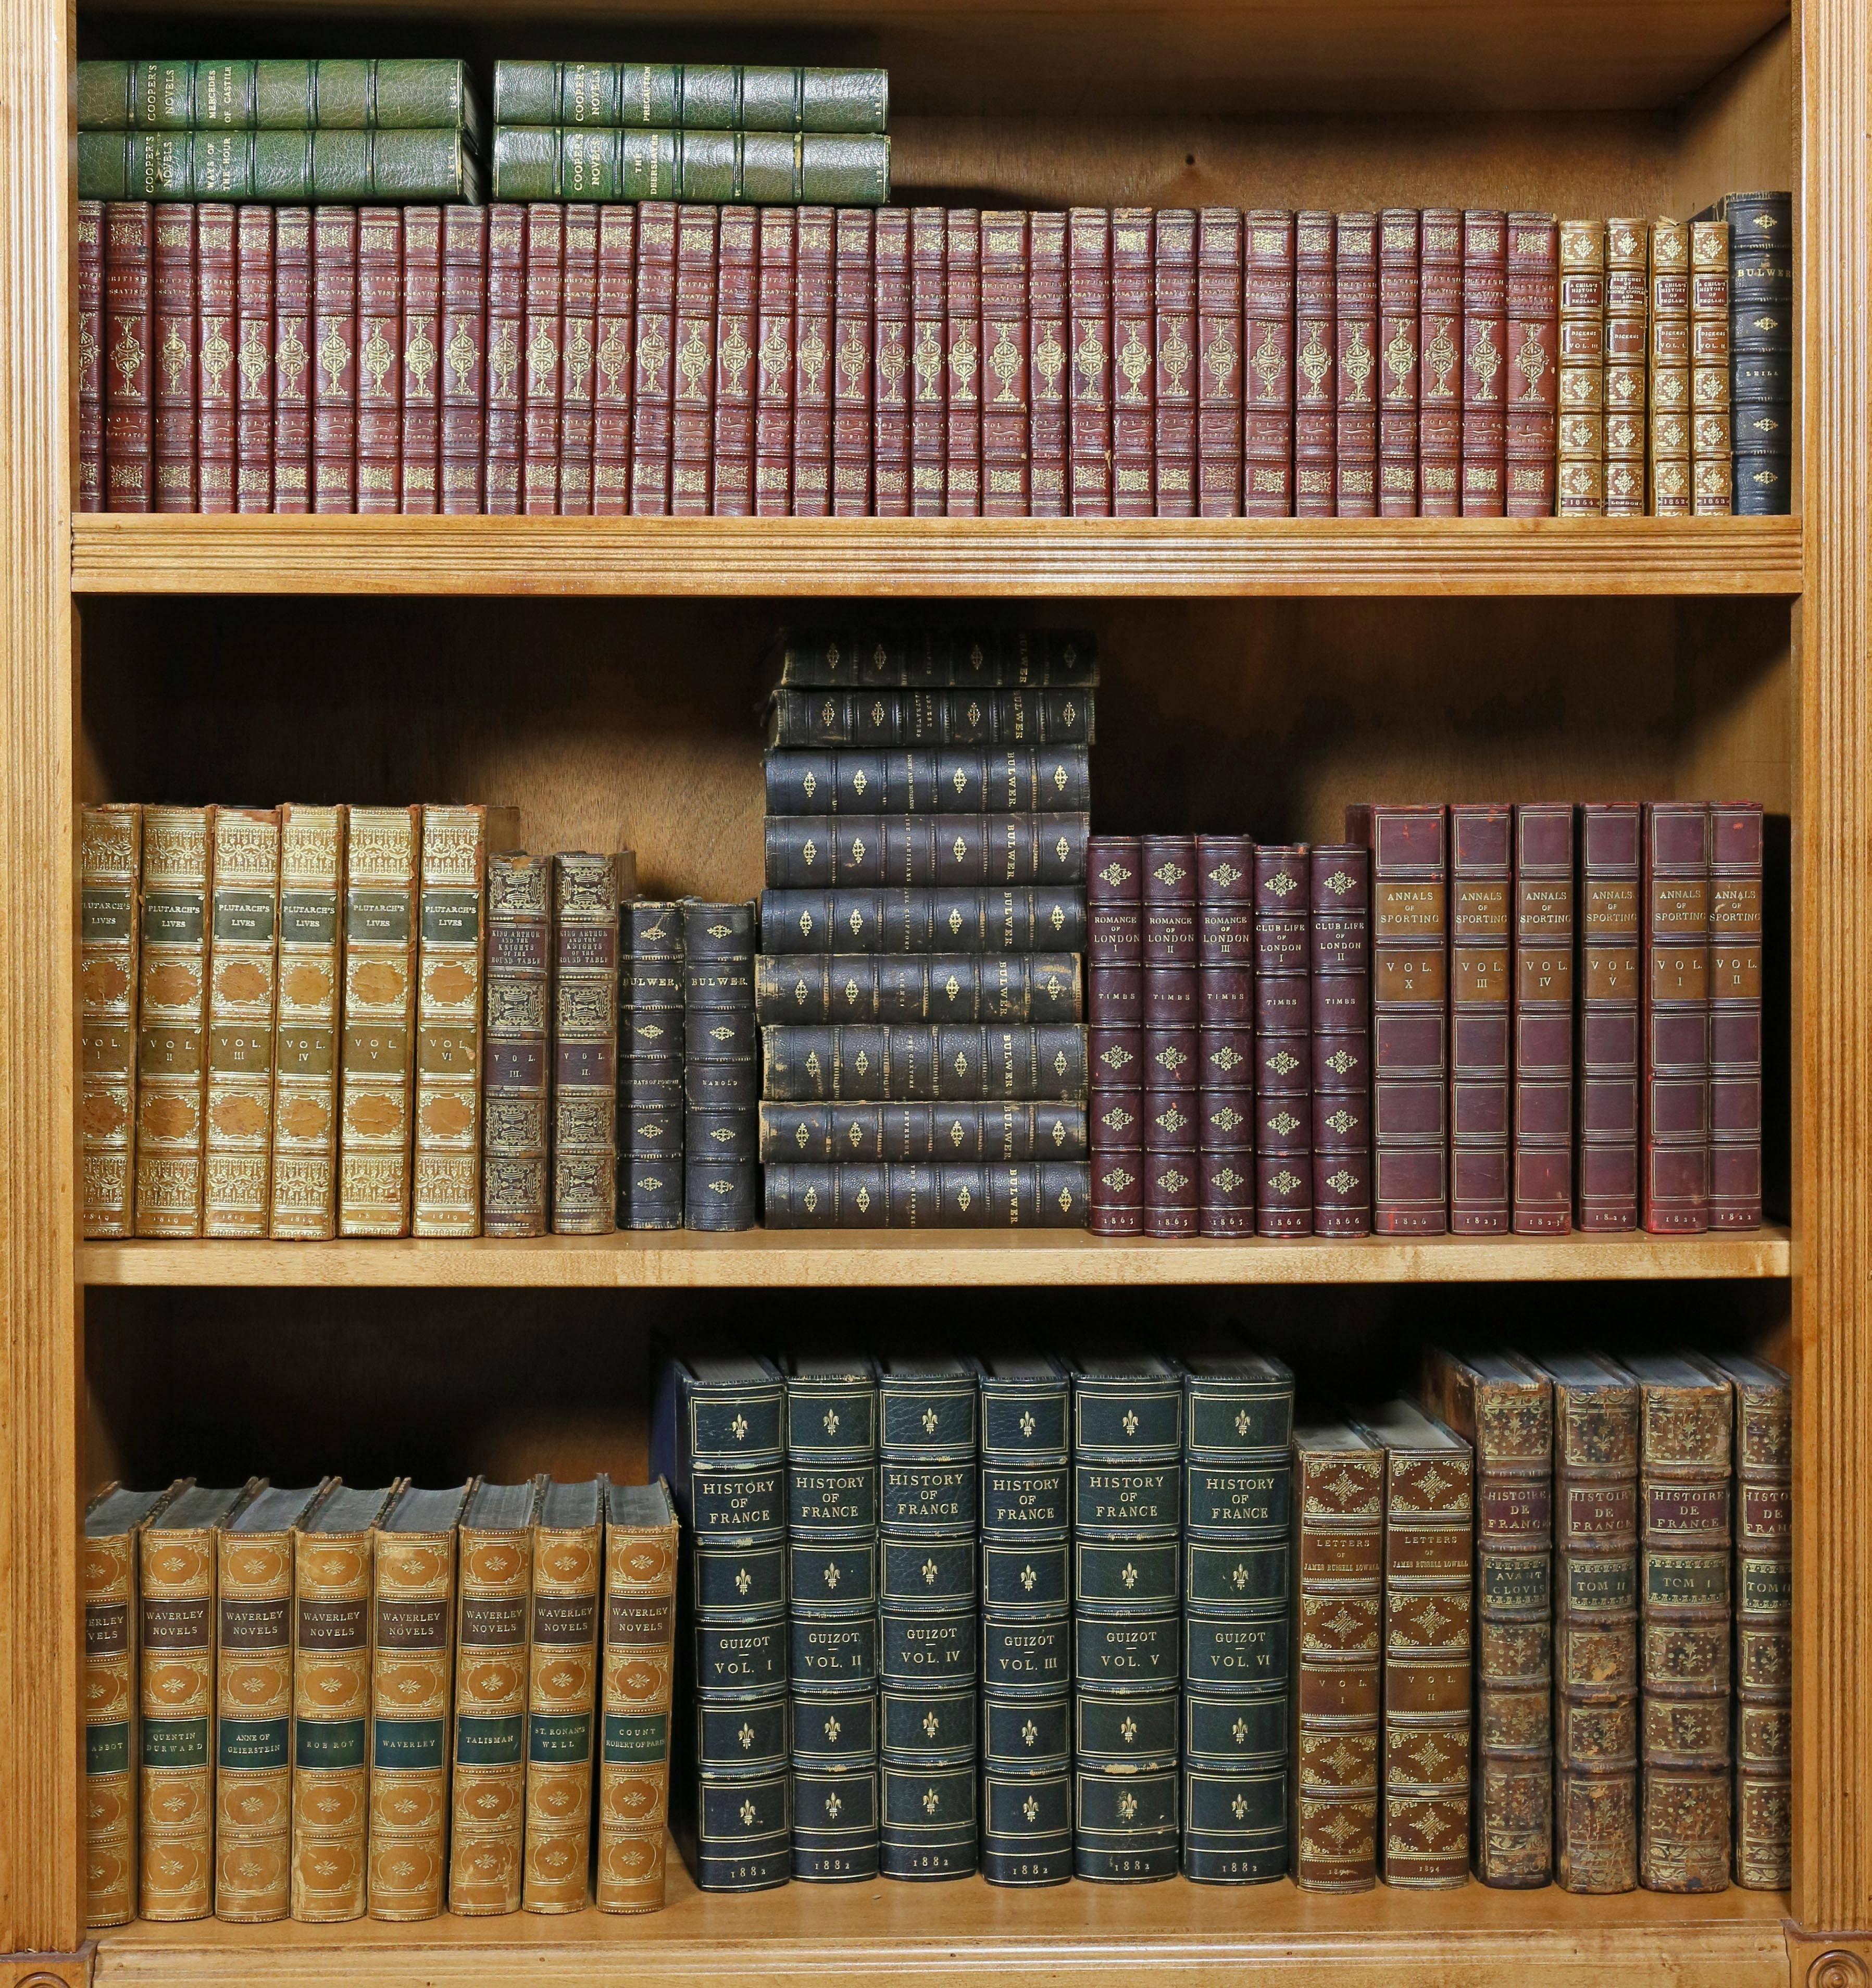 Including works by Byron, Shakespeare, history of France, history of highlands and clans, Bulwars works, Waverlys novels, Master Humphreys clock, History of France, Molieres works, Milton, Thackerey, Coopers, Secret Court Memoirs, Thackereys Works.